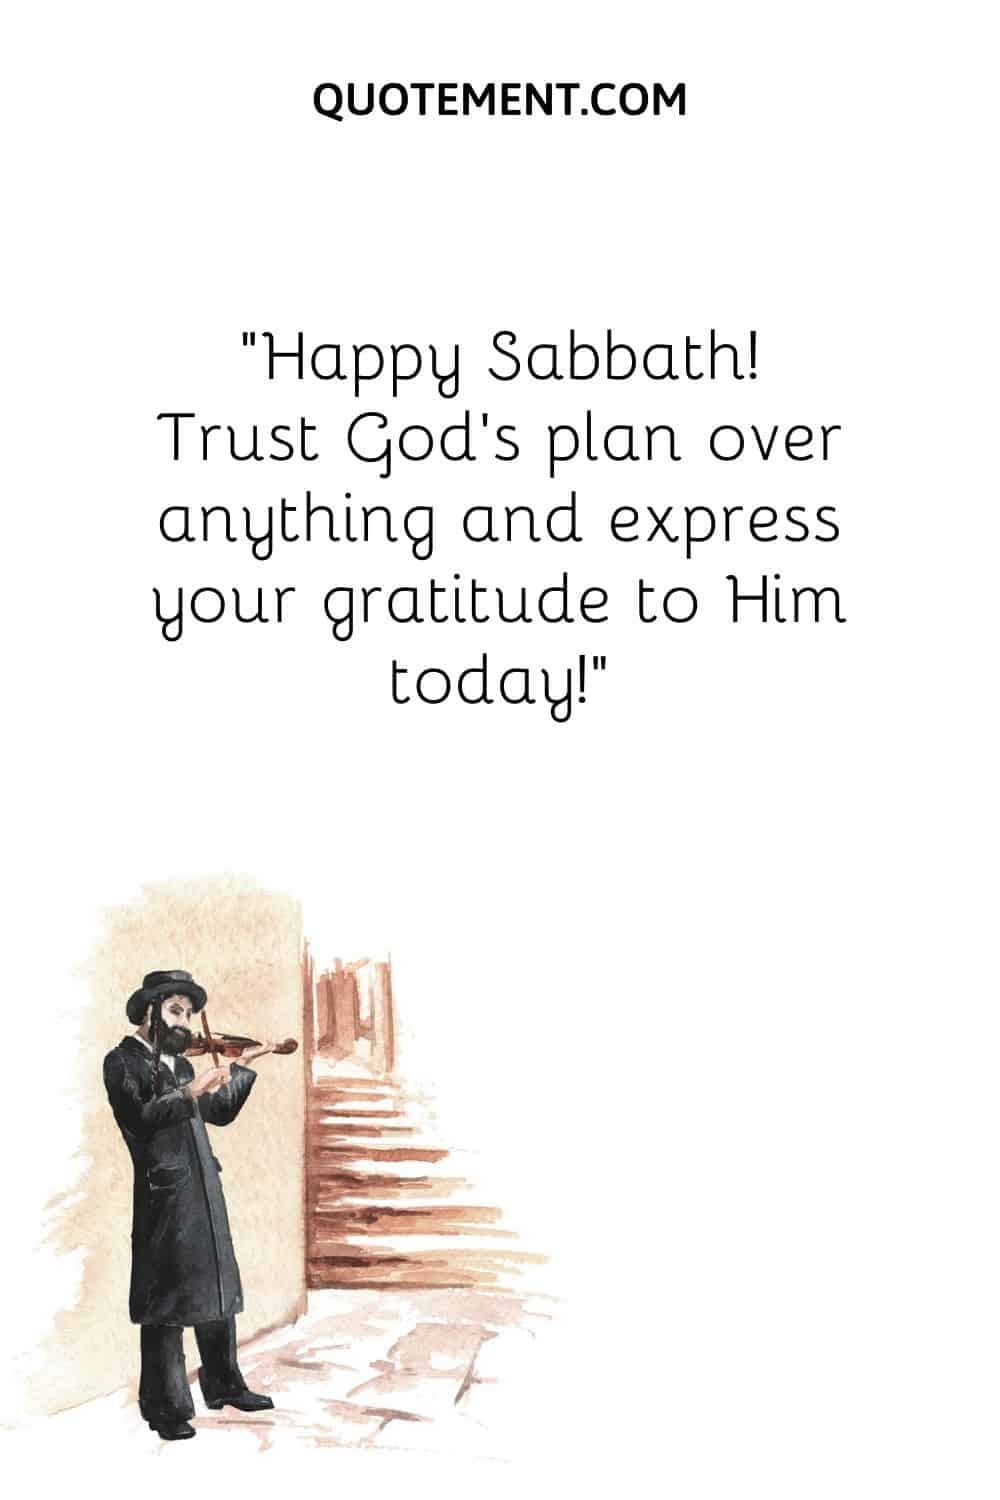 Trust God’s plan over anything and express your gratitude to Him today